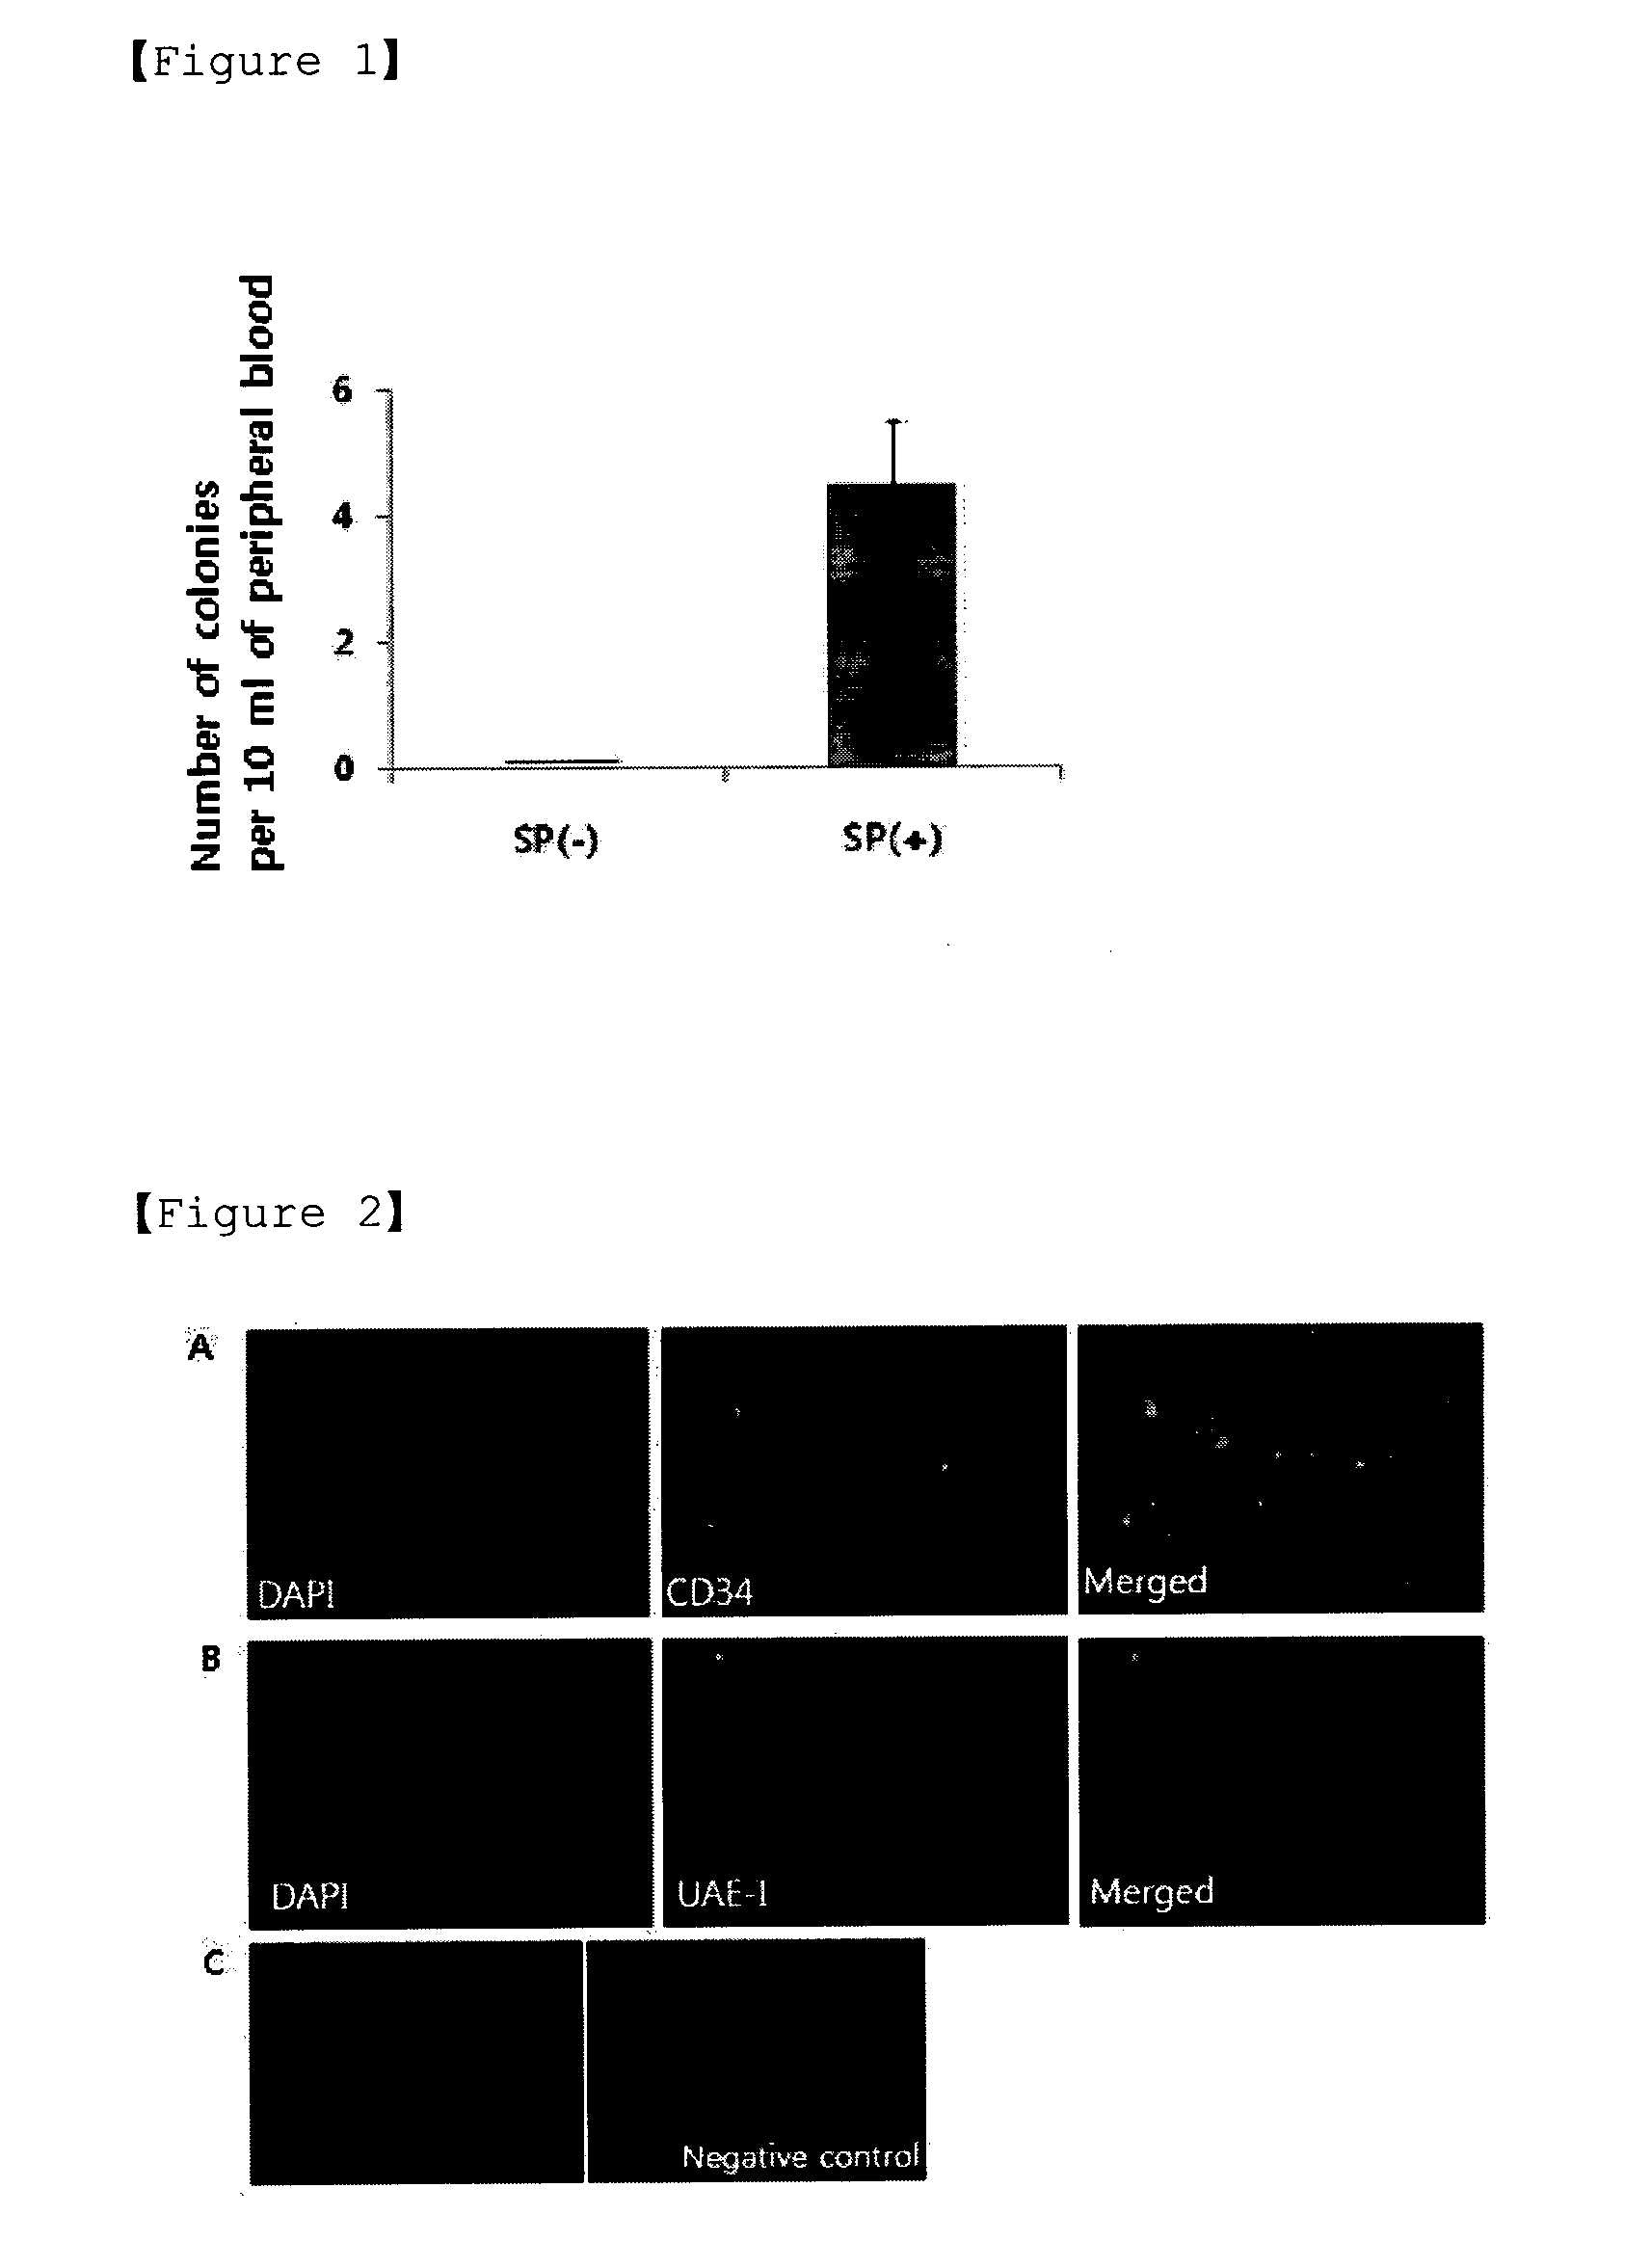 Agent for stimulating mobilization of endothelial progenitor cells